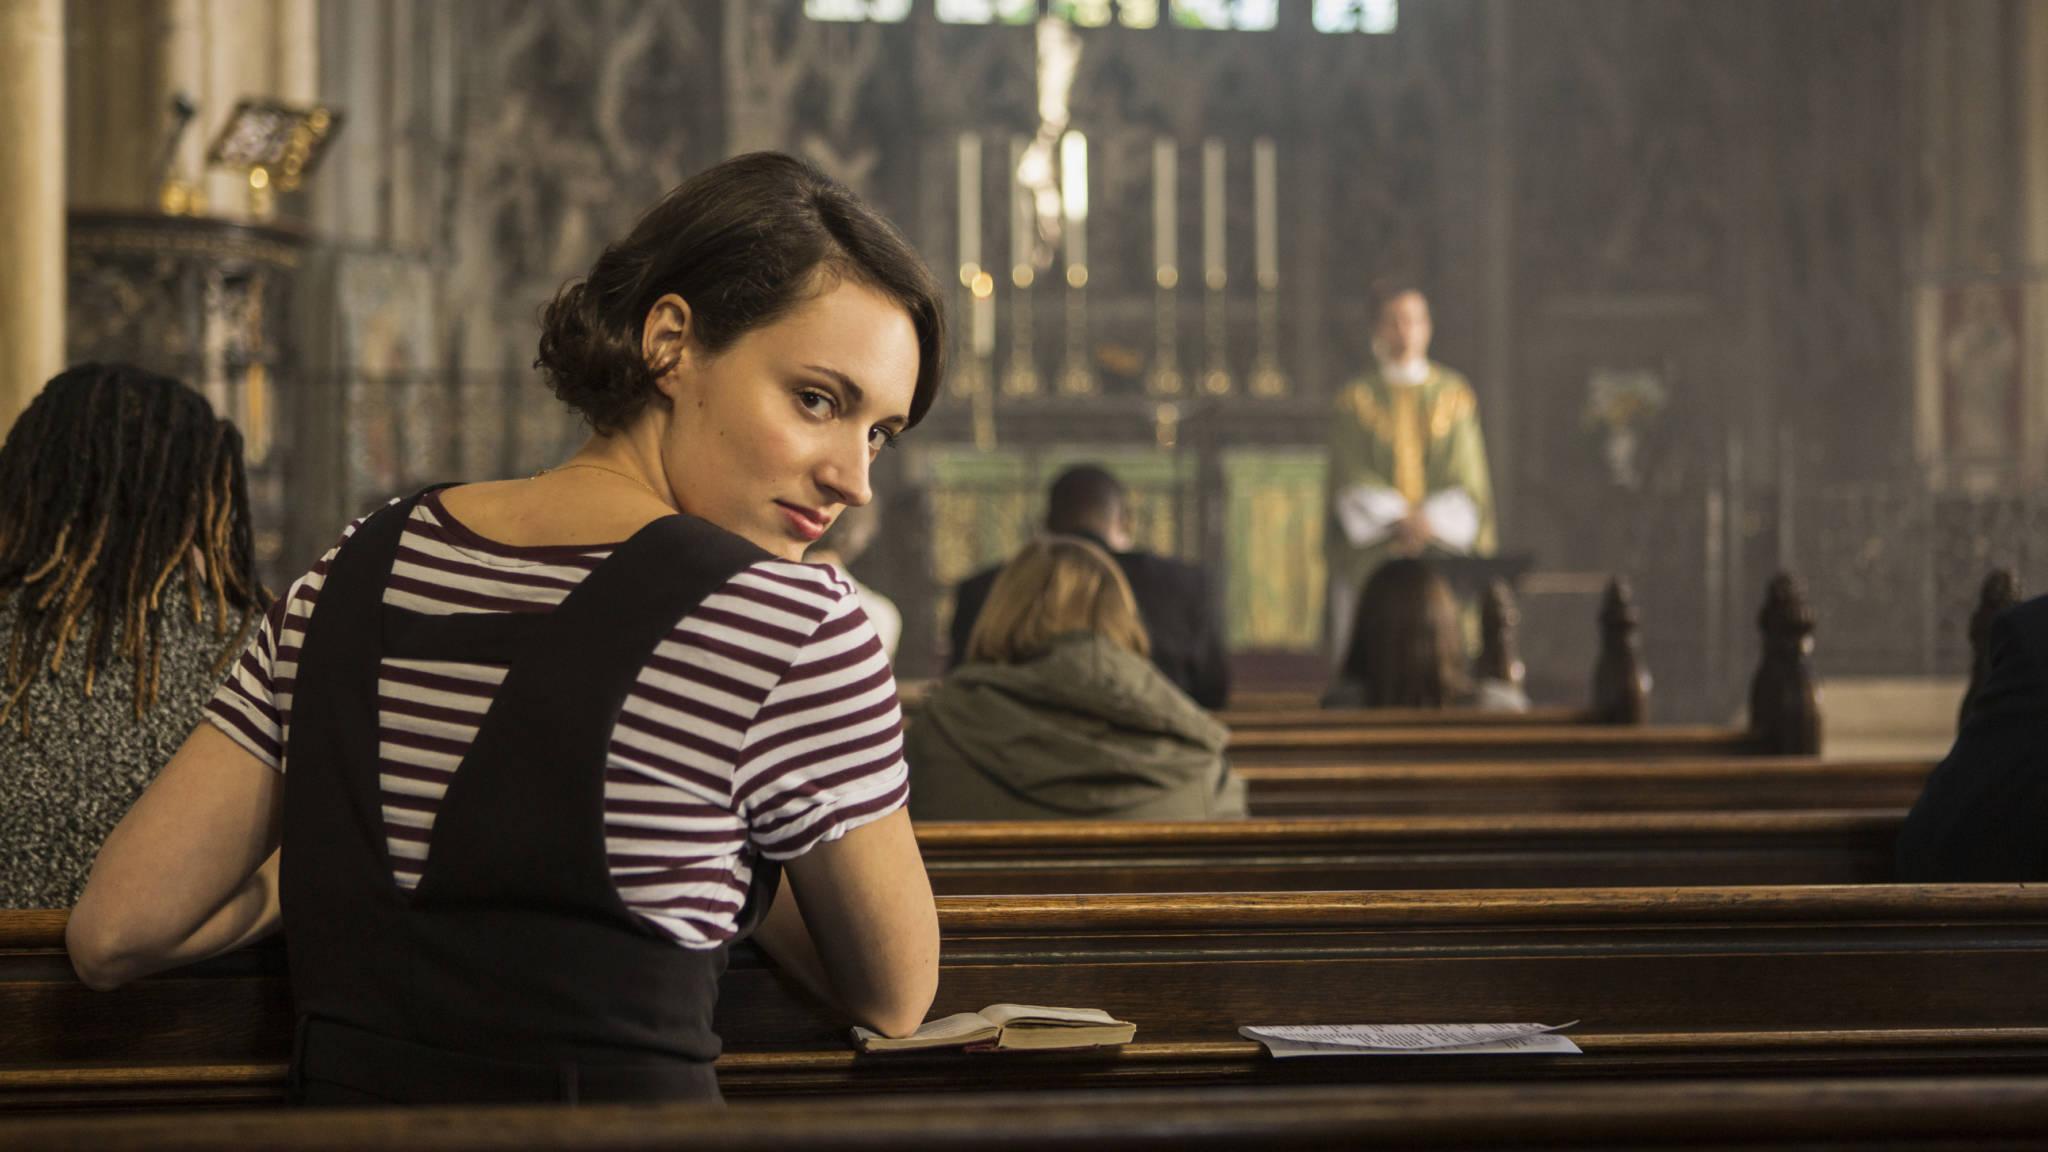 Fleabag Season 2: Release Date, Cast, And Much More!